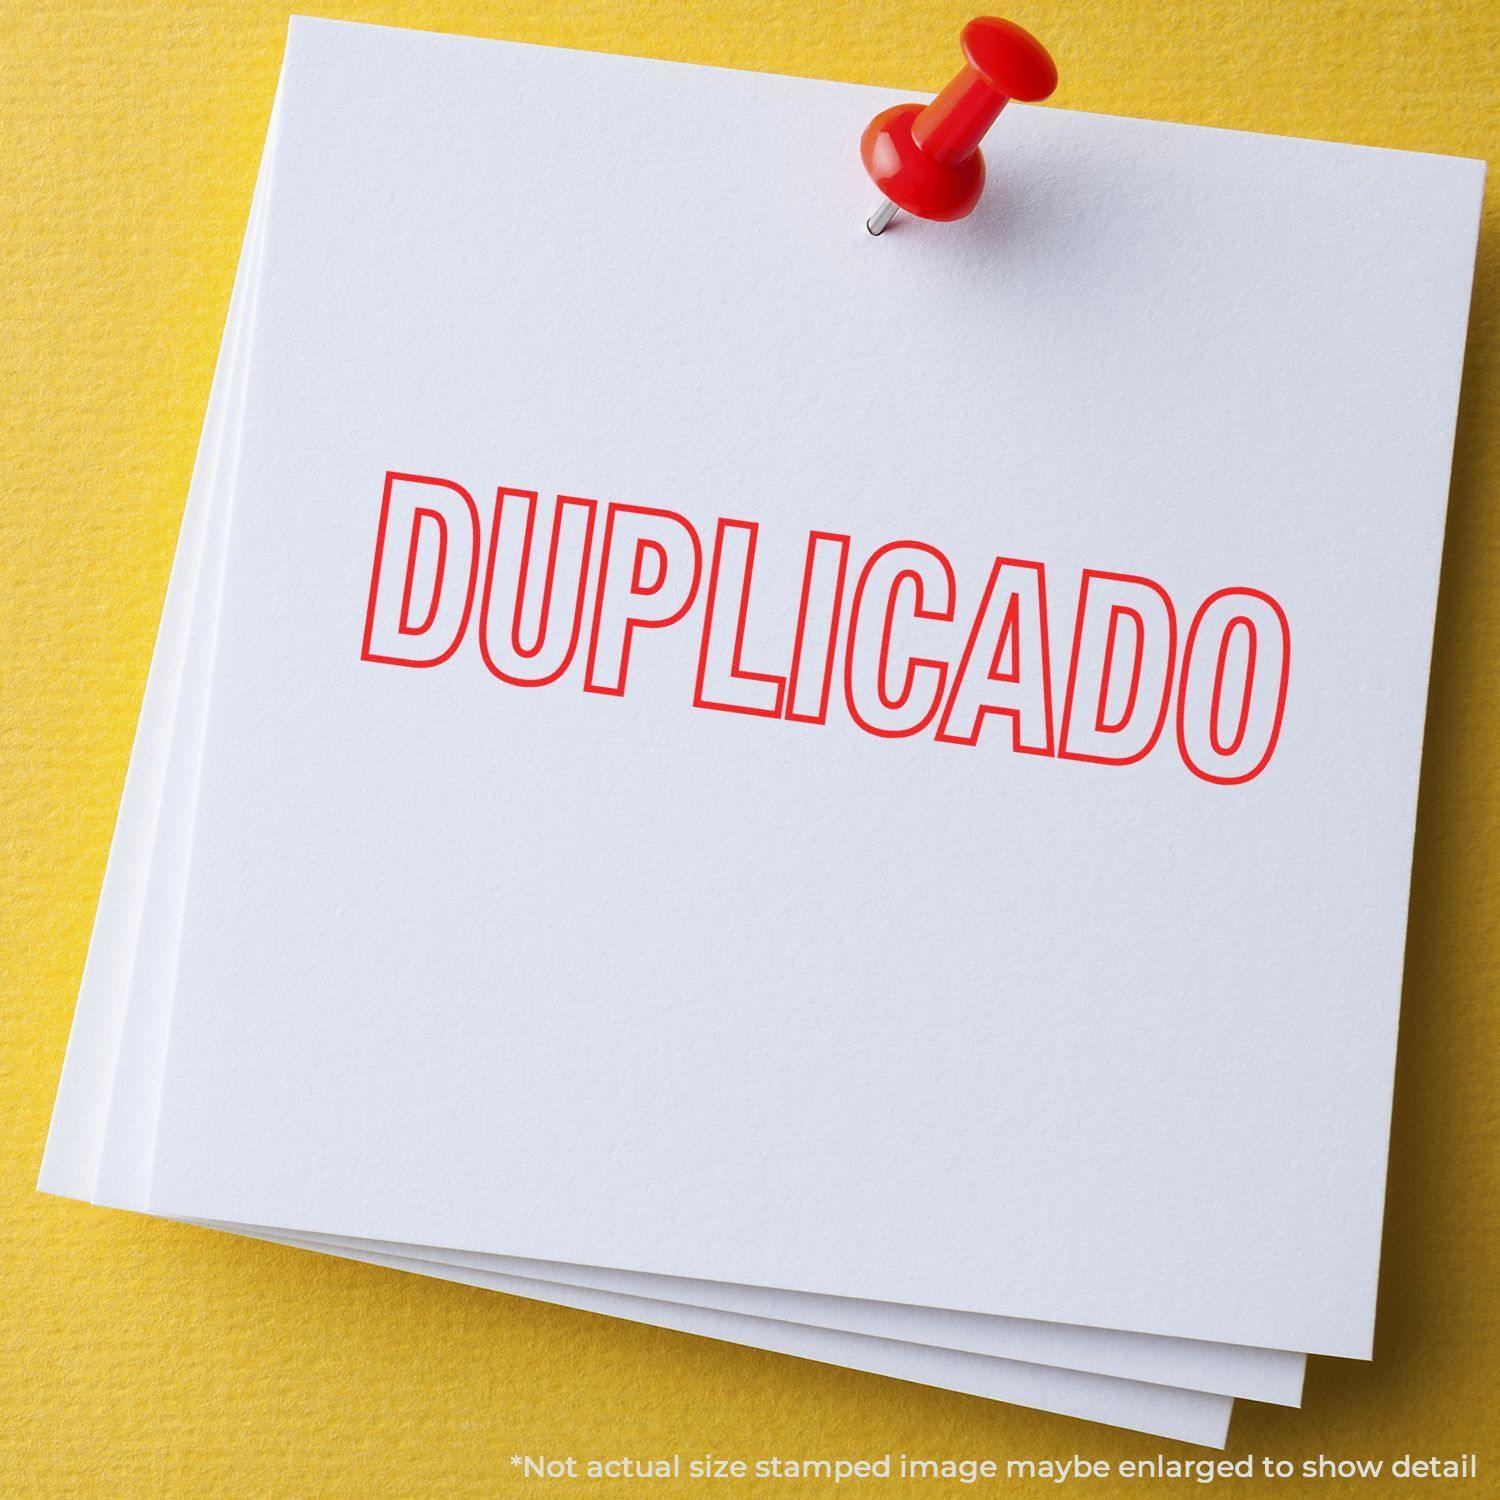 Large Duplicado Rubber Stamp In Use Photo